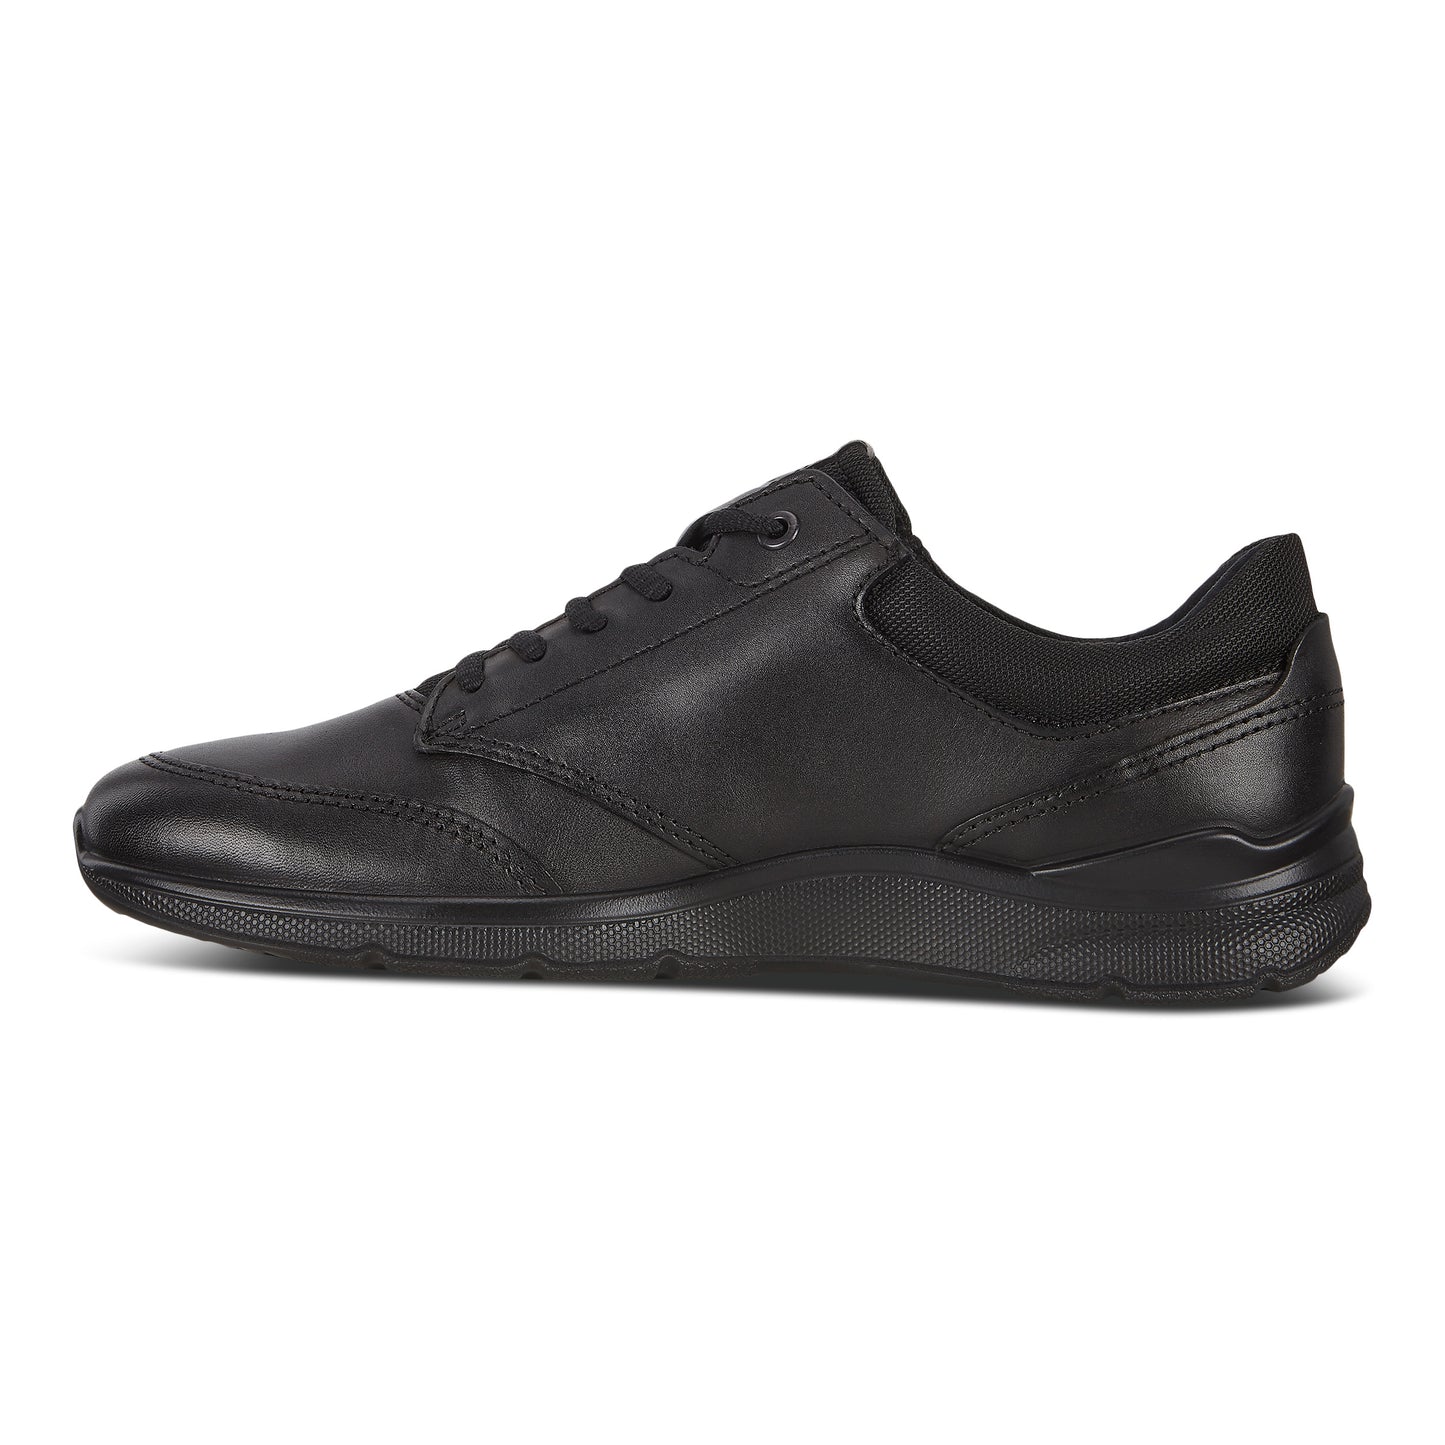 Ecco 511734 51052 Irving Black Casual Shoes